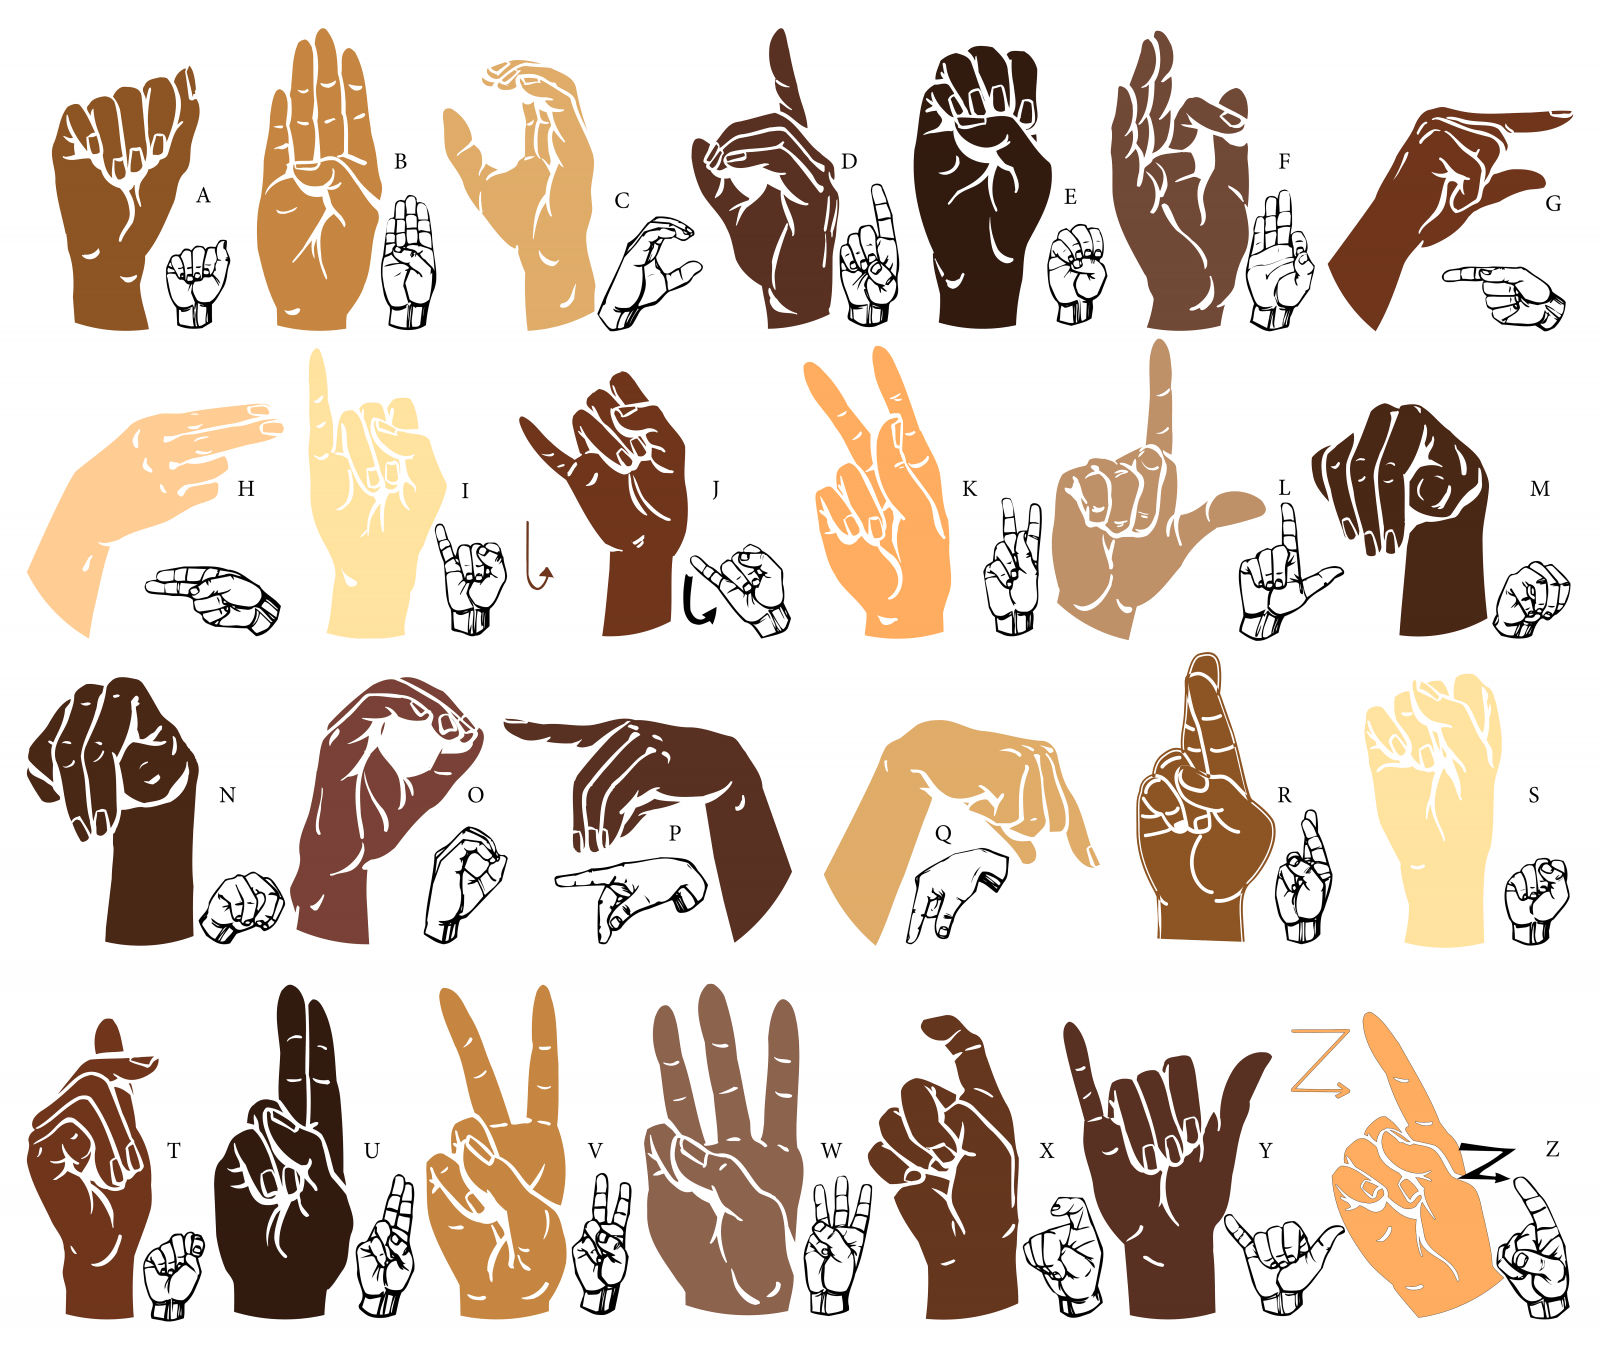 The alphabet is depicted in American Sign Language using Gallaudet font and Adobe Illustrator vector graphics. 